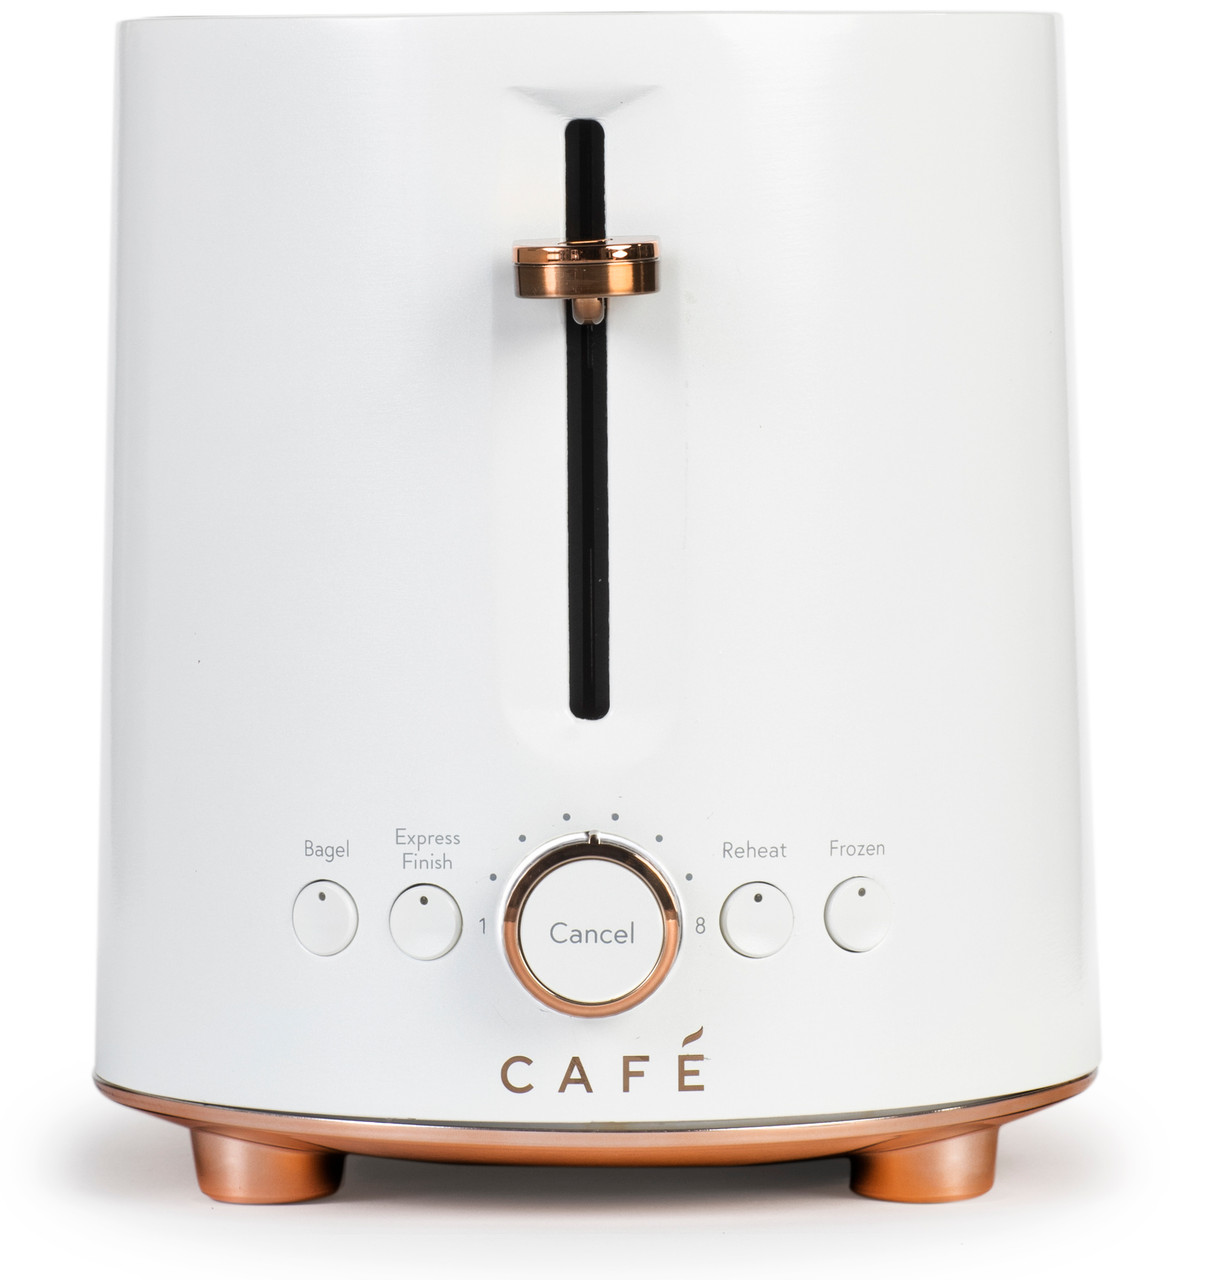 Holiday Small Appliances Gift Guide - Cafe Appliances